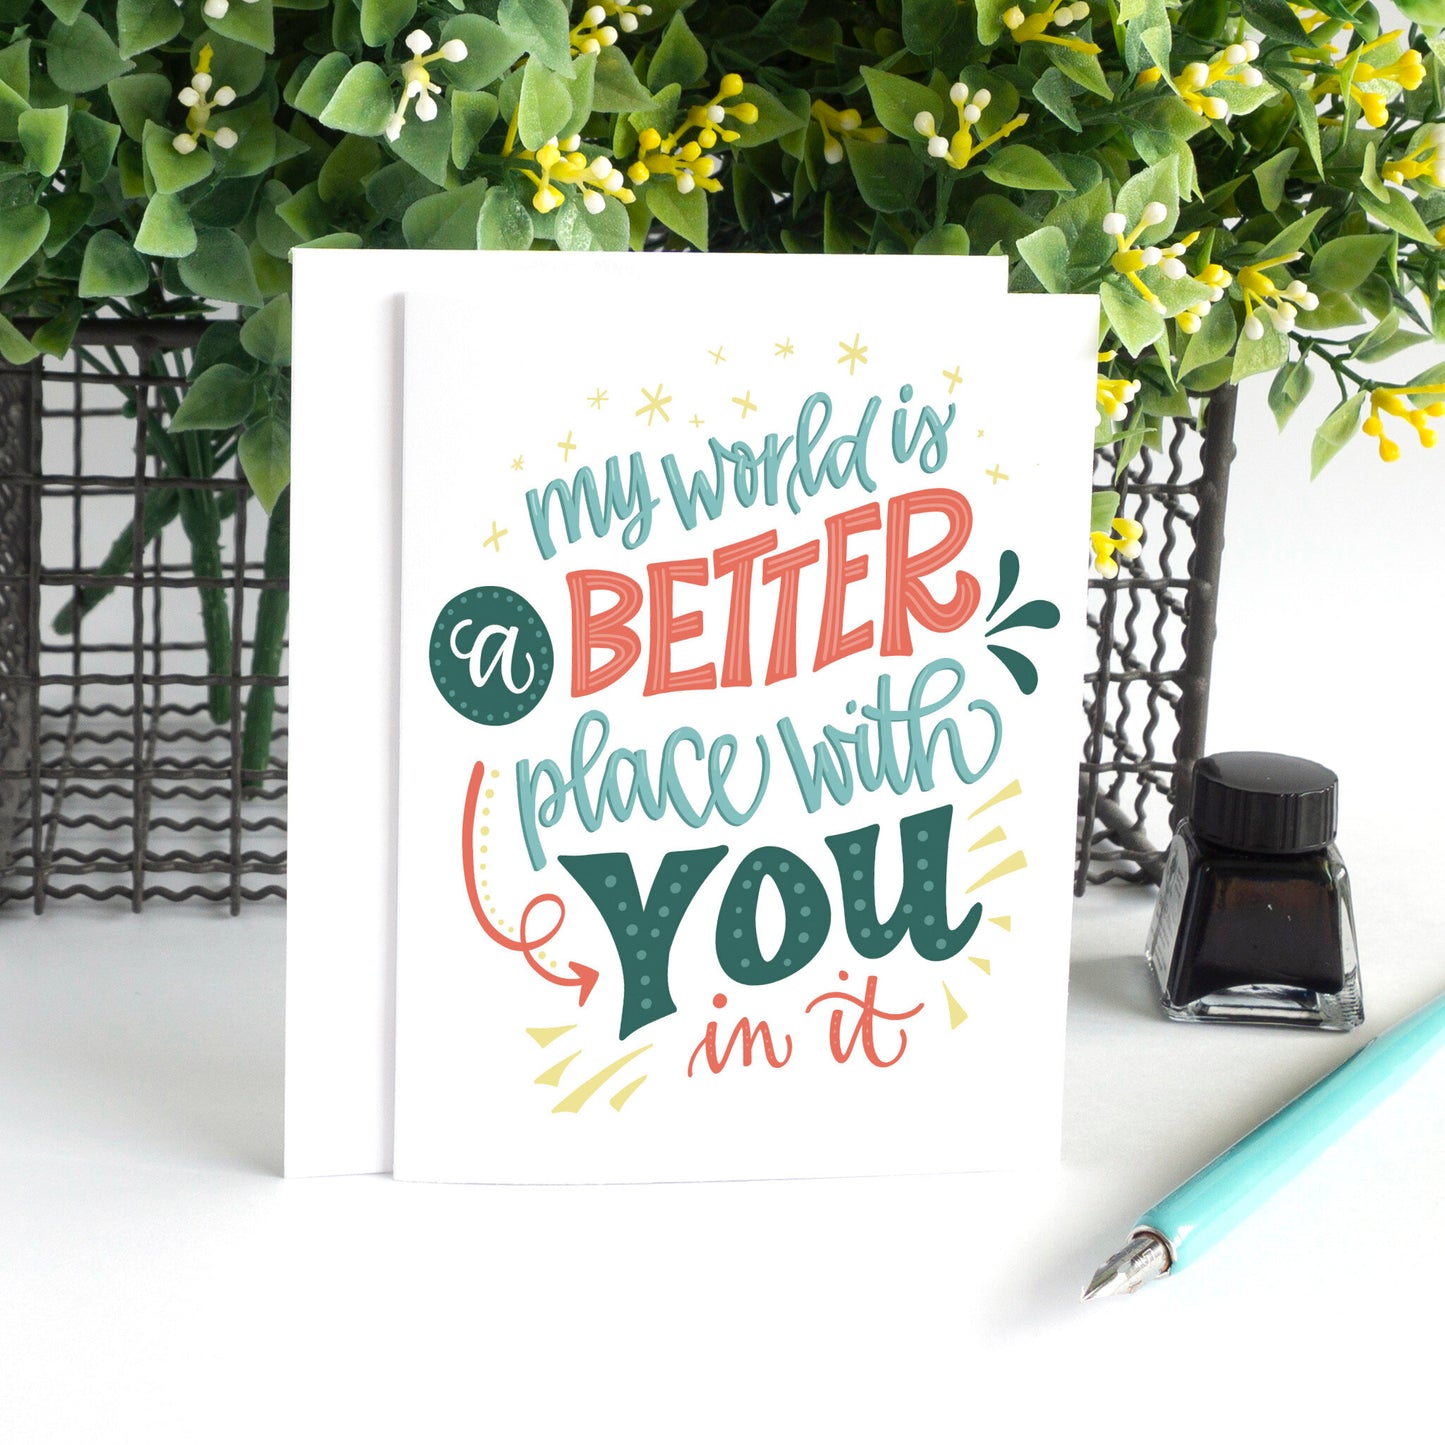 My World is a Better Place with You in it Love Card